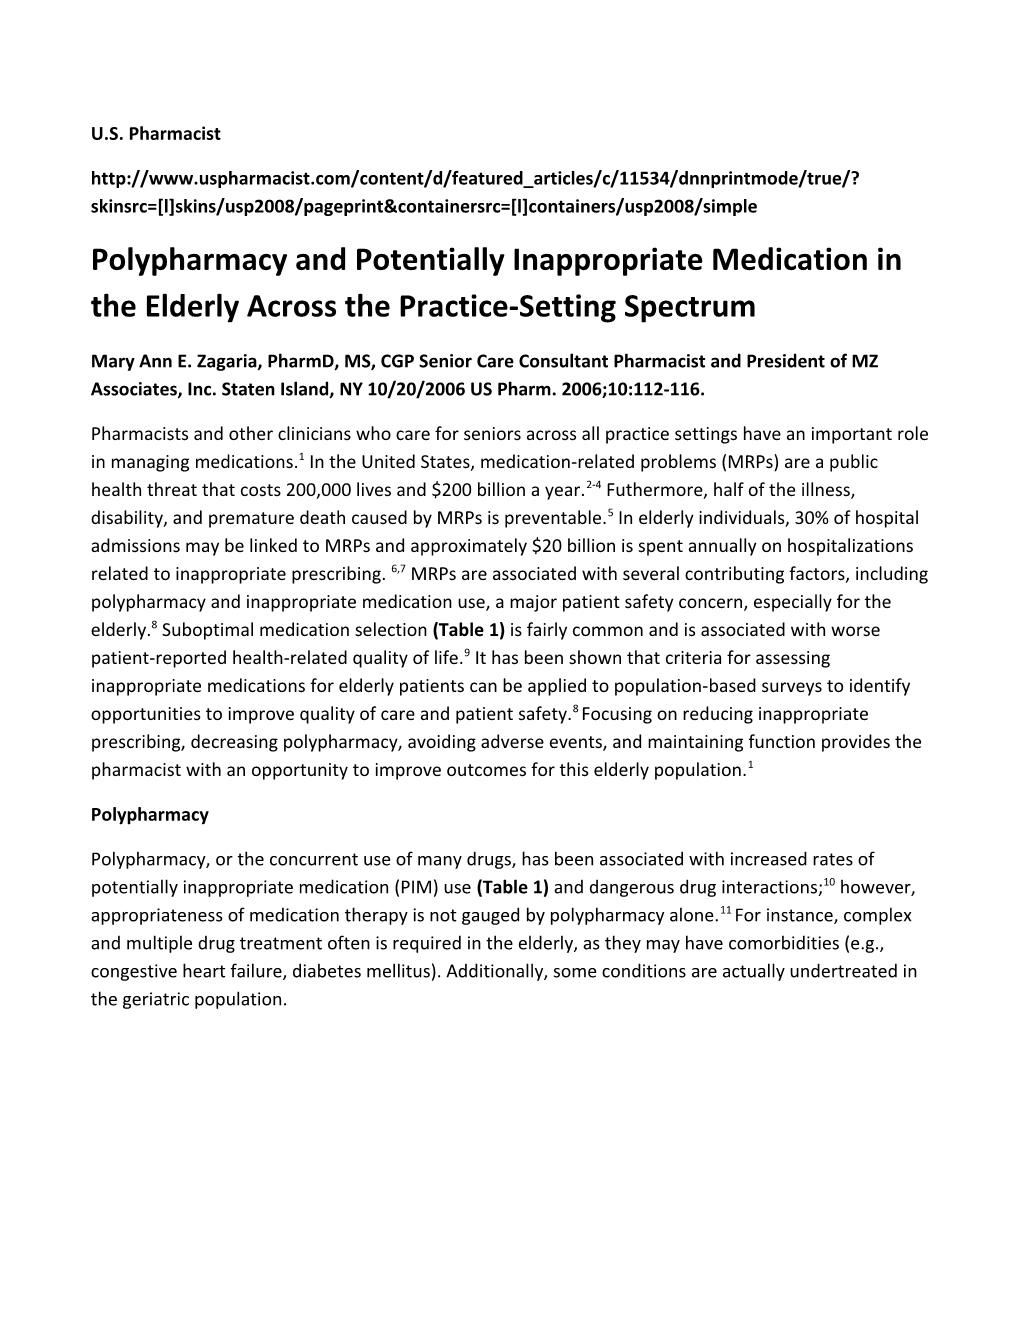 Polypharmacy and Potentially Inappropriate Medication in the Elderly Across The